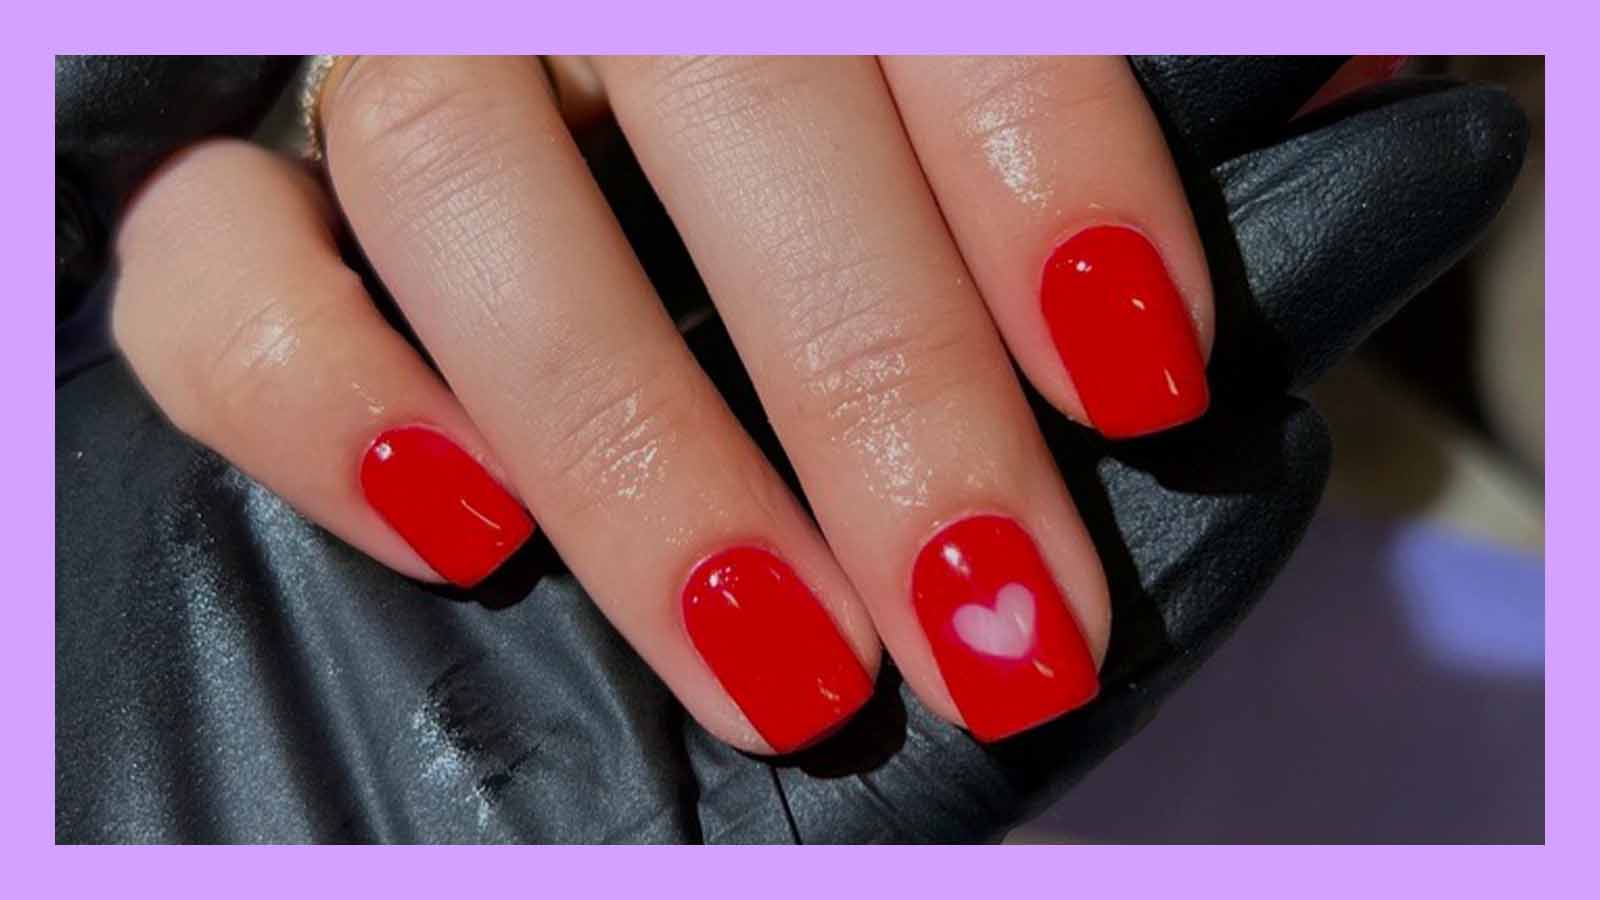 37 Best Valentine's day nails design Perfect for your date - Page 10 of 37  - Bellacocosum | Valentine's day nails, Pointed nails, Nail designs